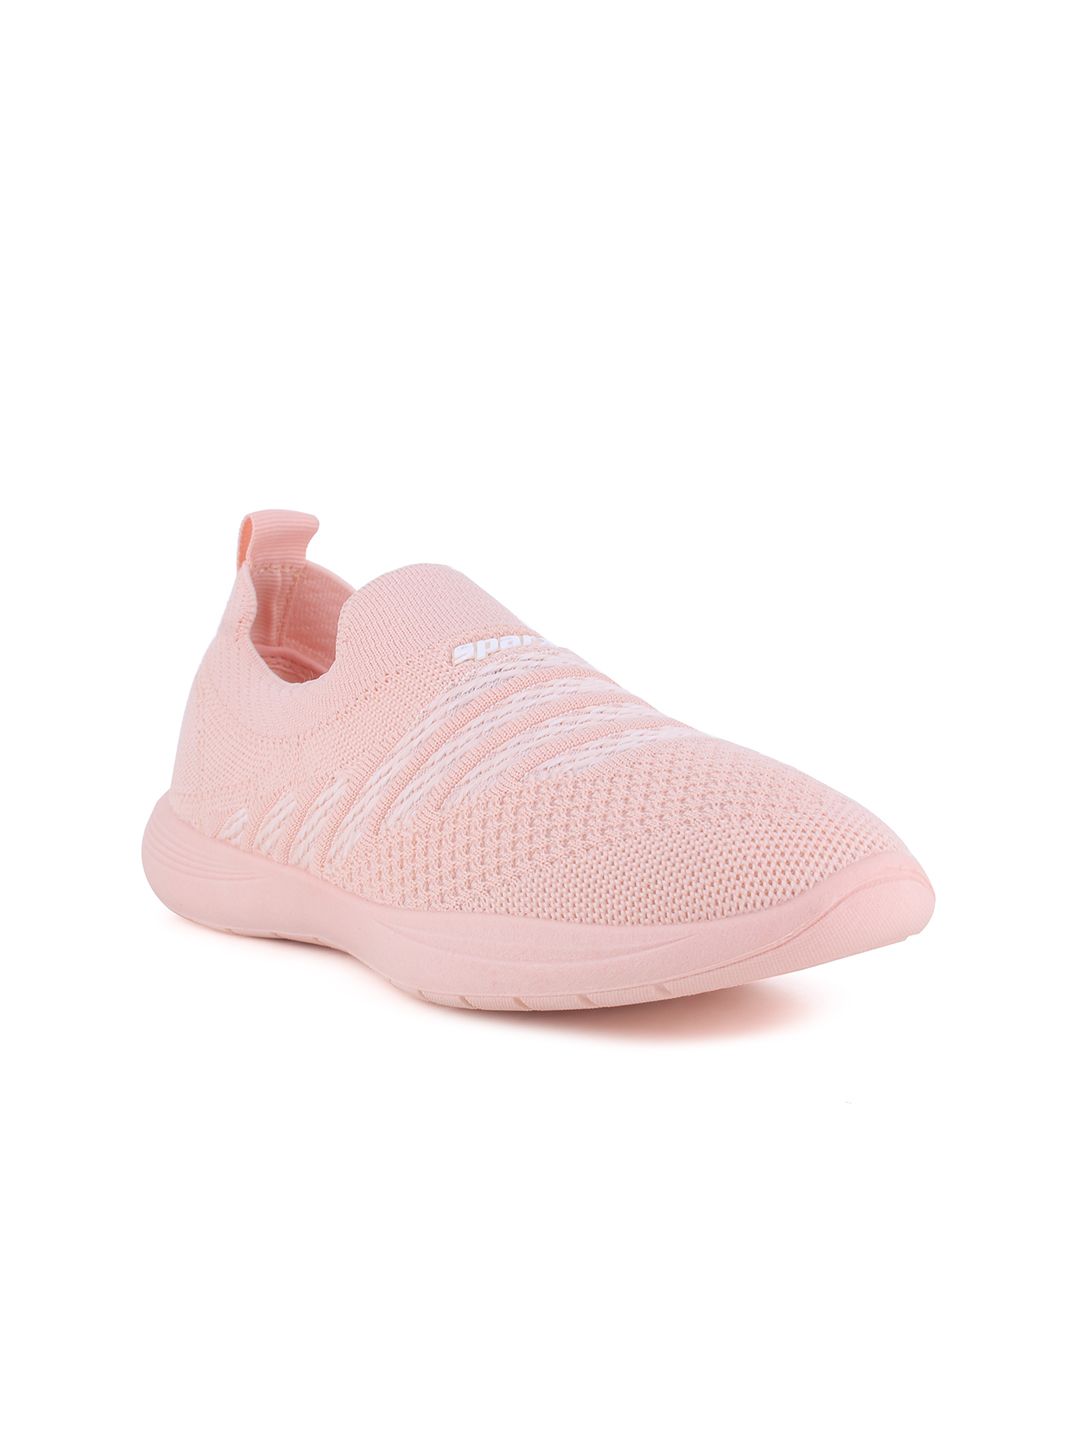 Sparx Women Peach-Coloured Slip-On Sneakers Price in India